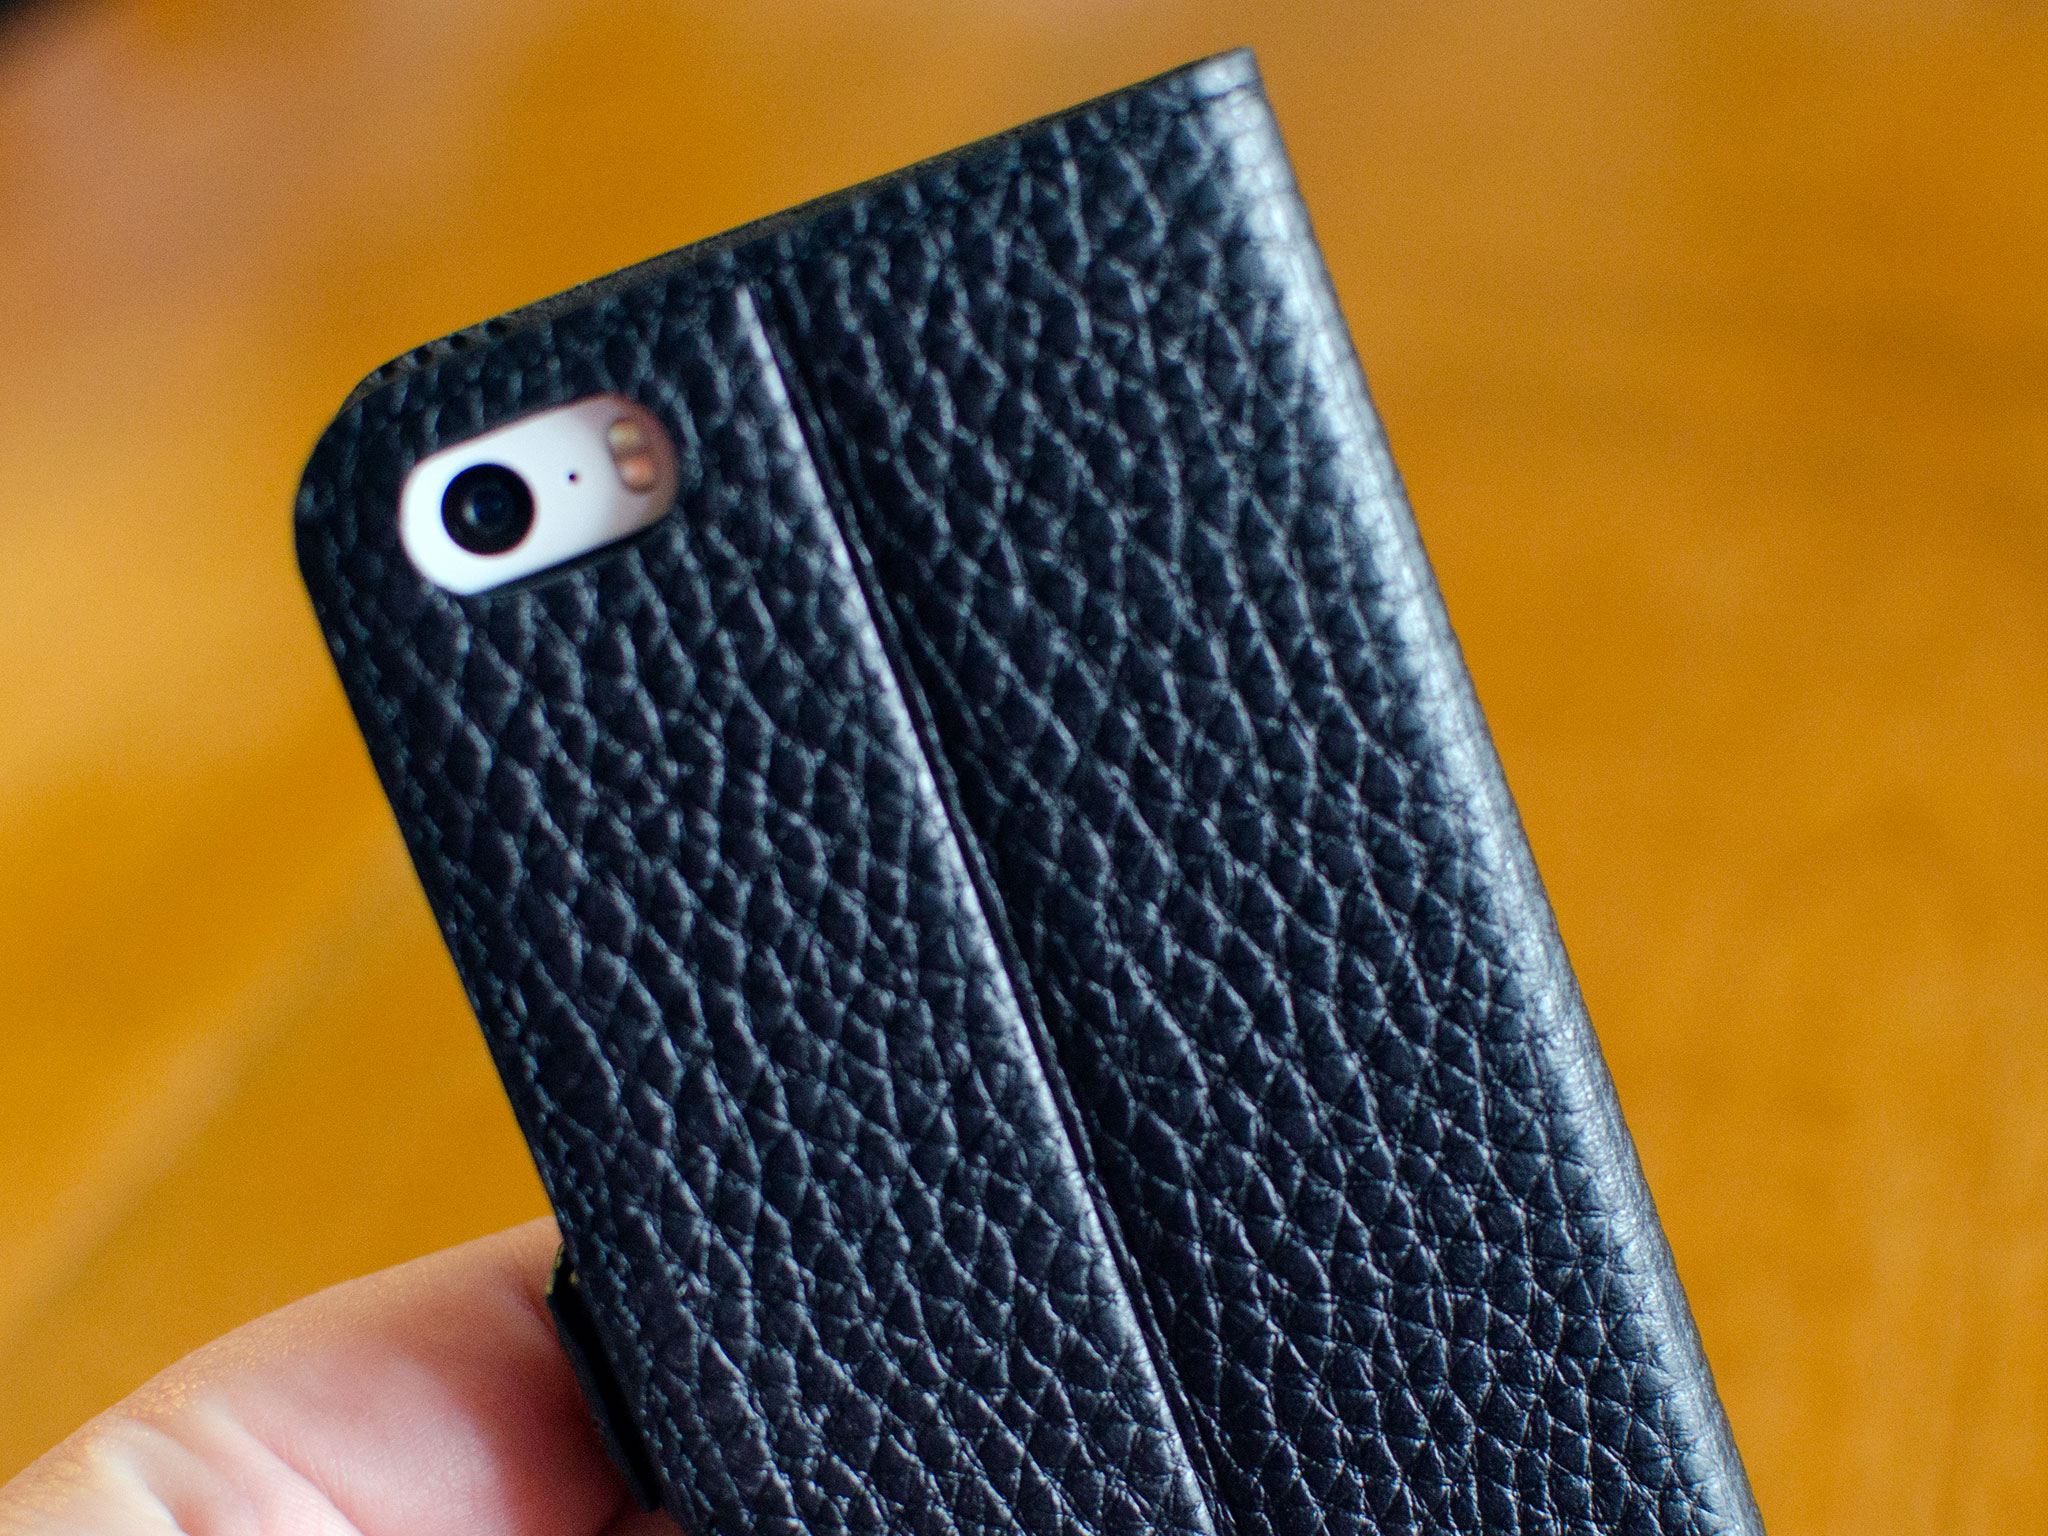 Story Leather Genuine Side Flip Wallet Case for iPhone 5 and iPhone 5s review